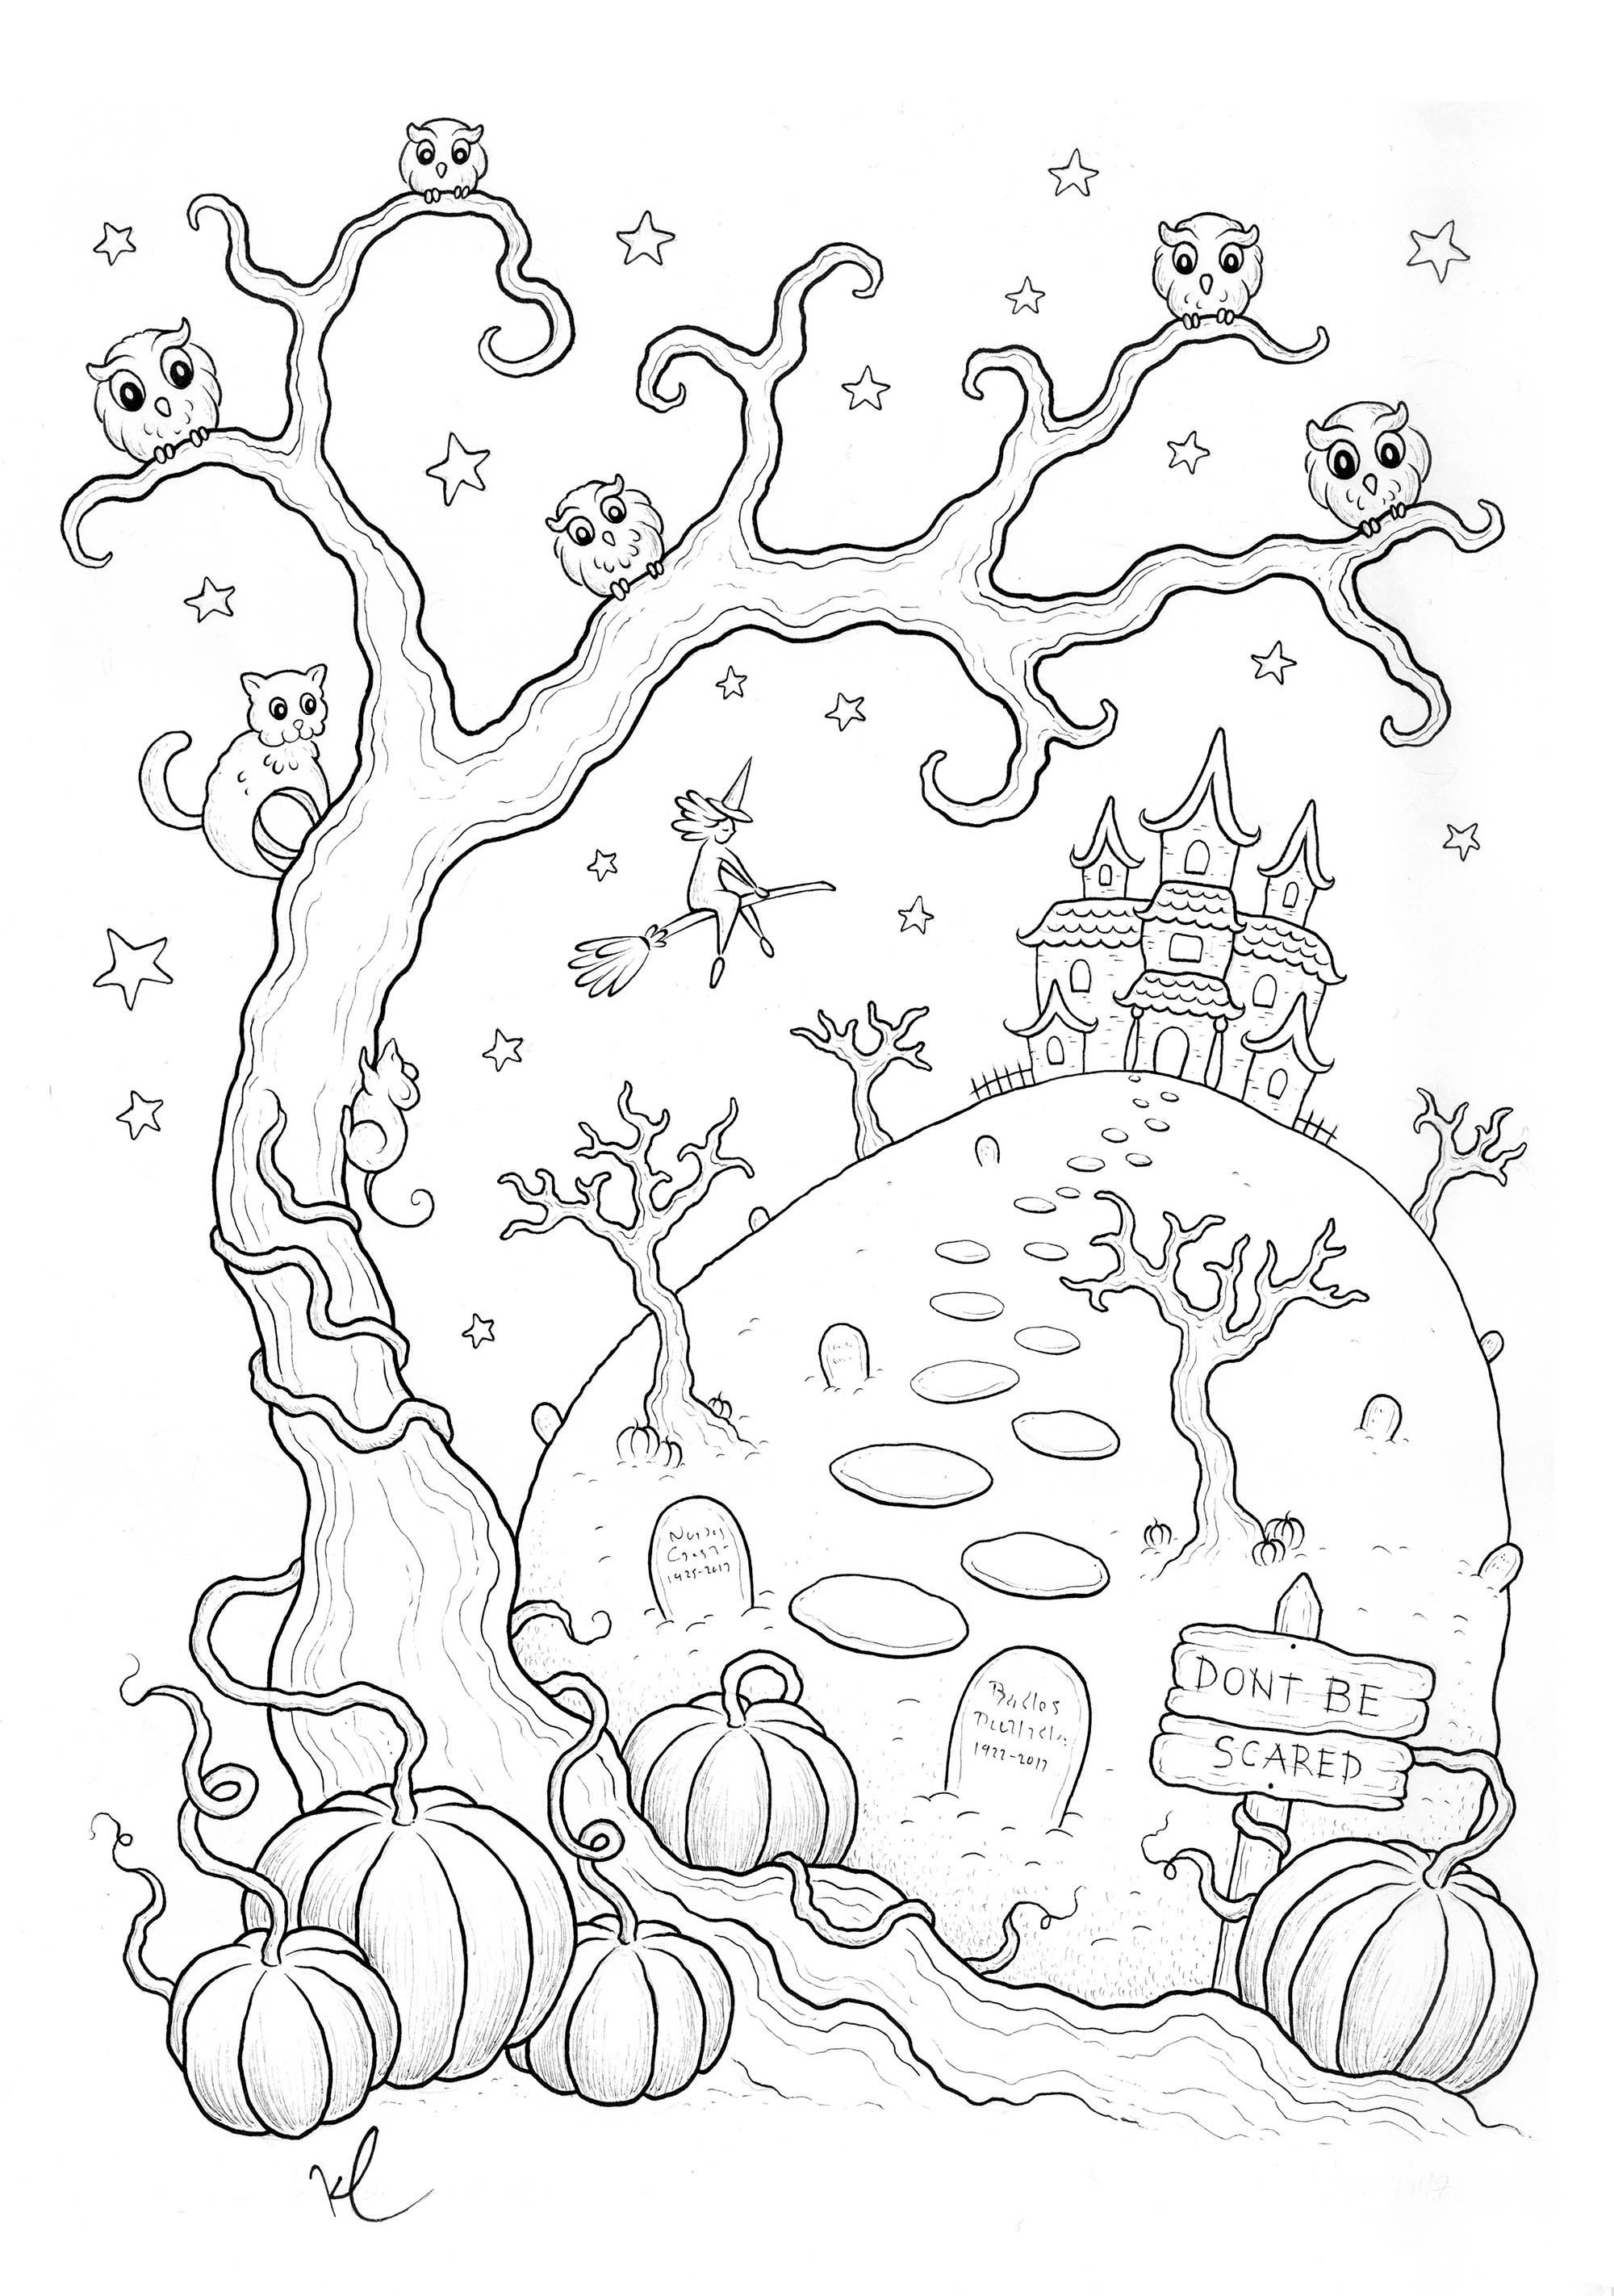 Simple Halloween coloring page for children